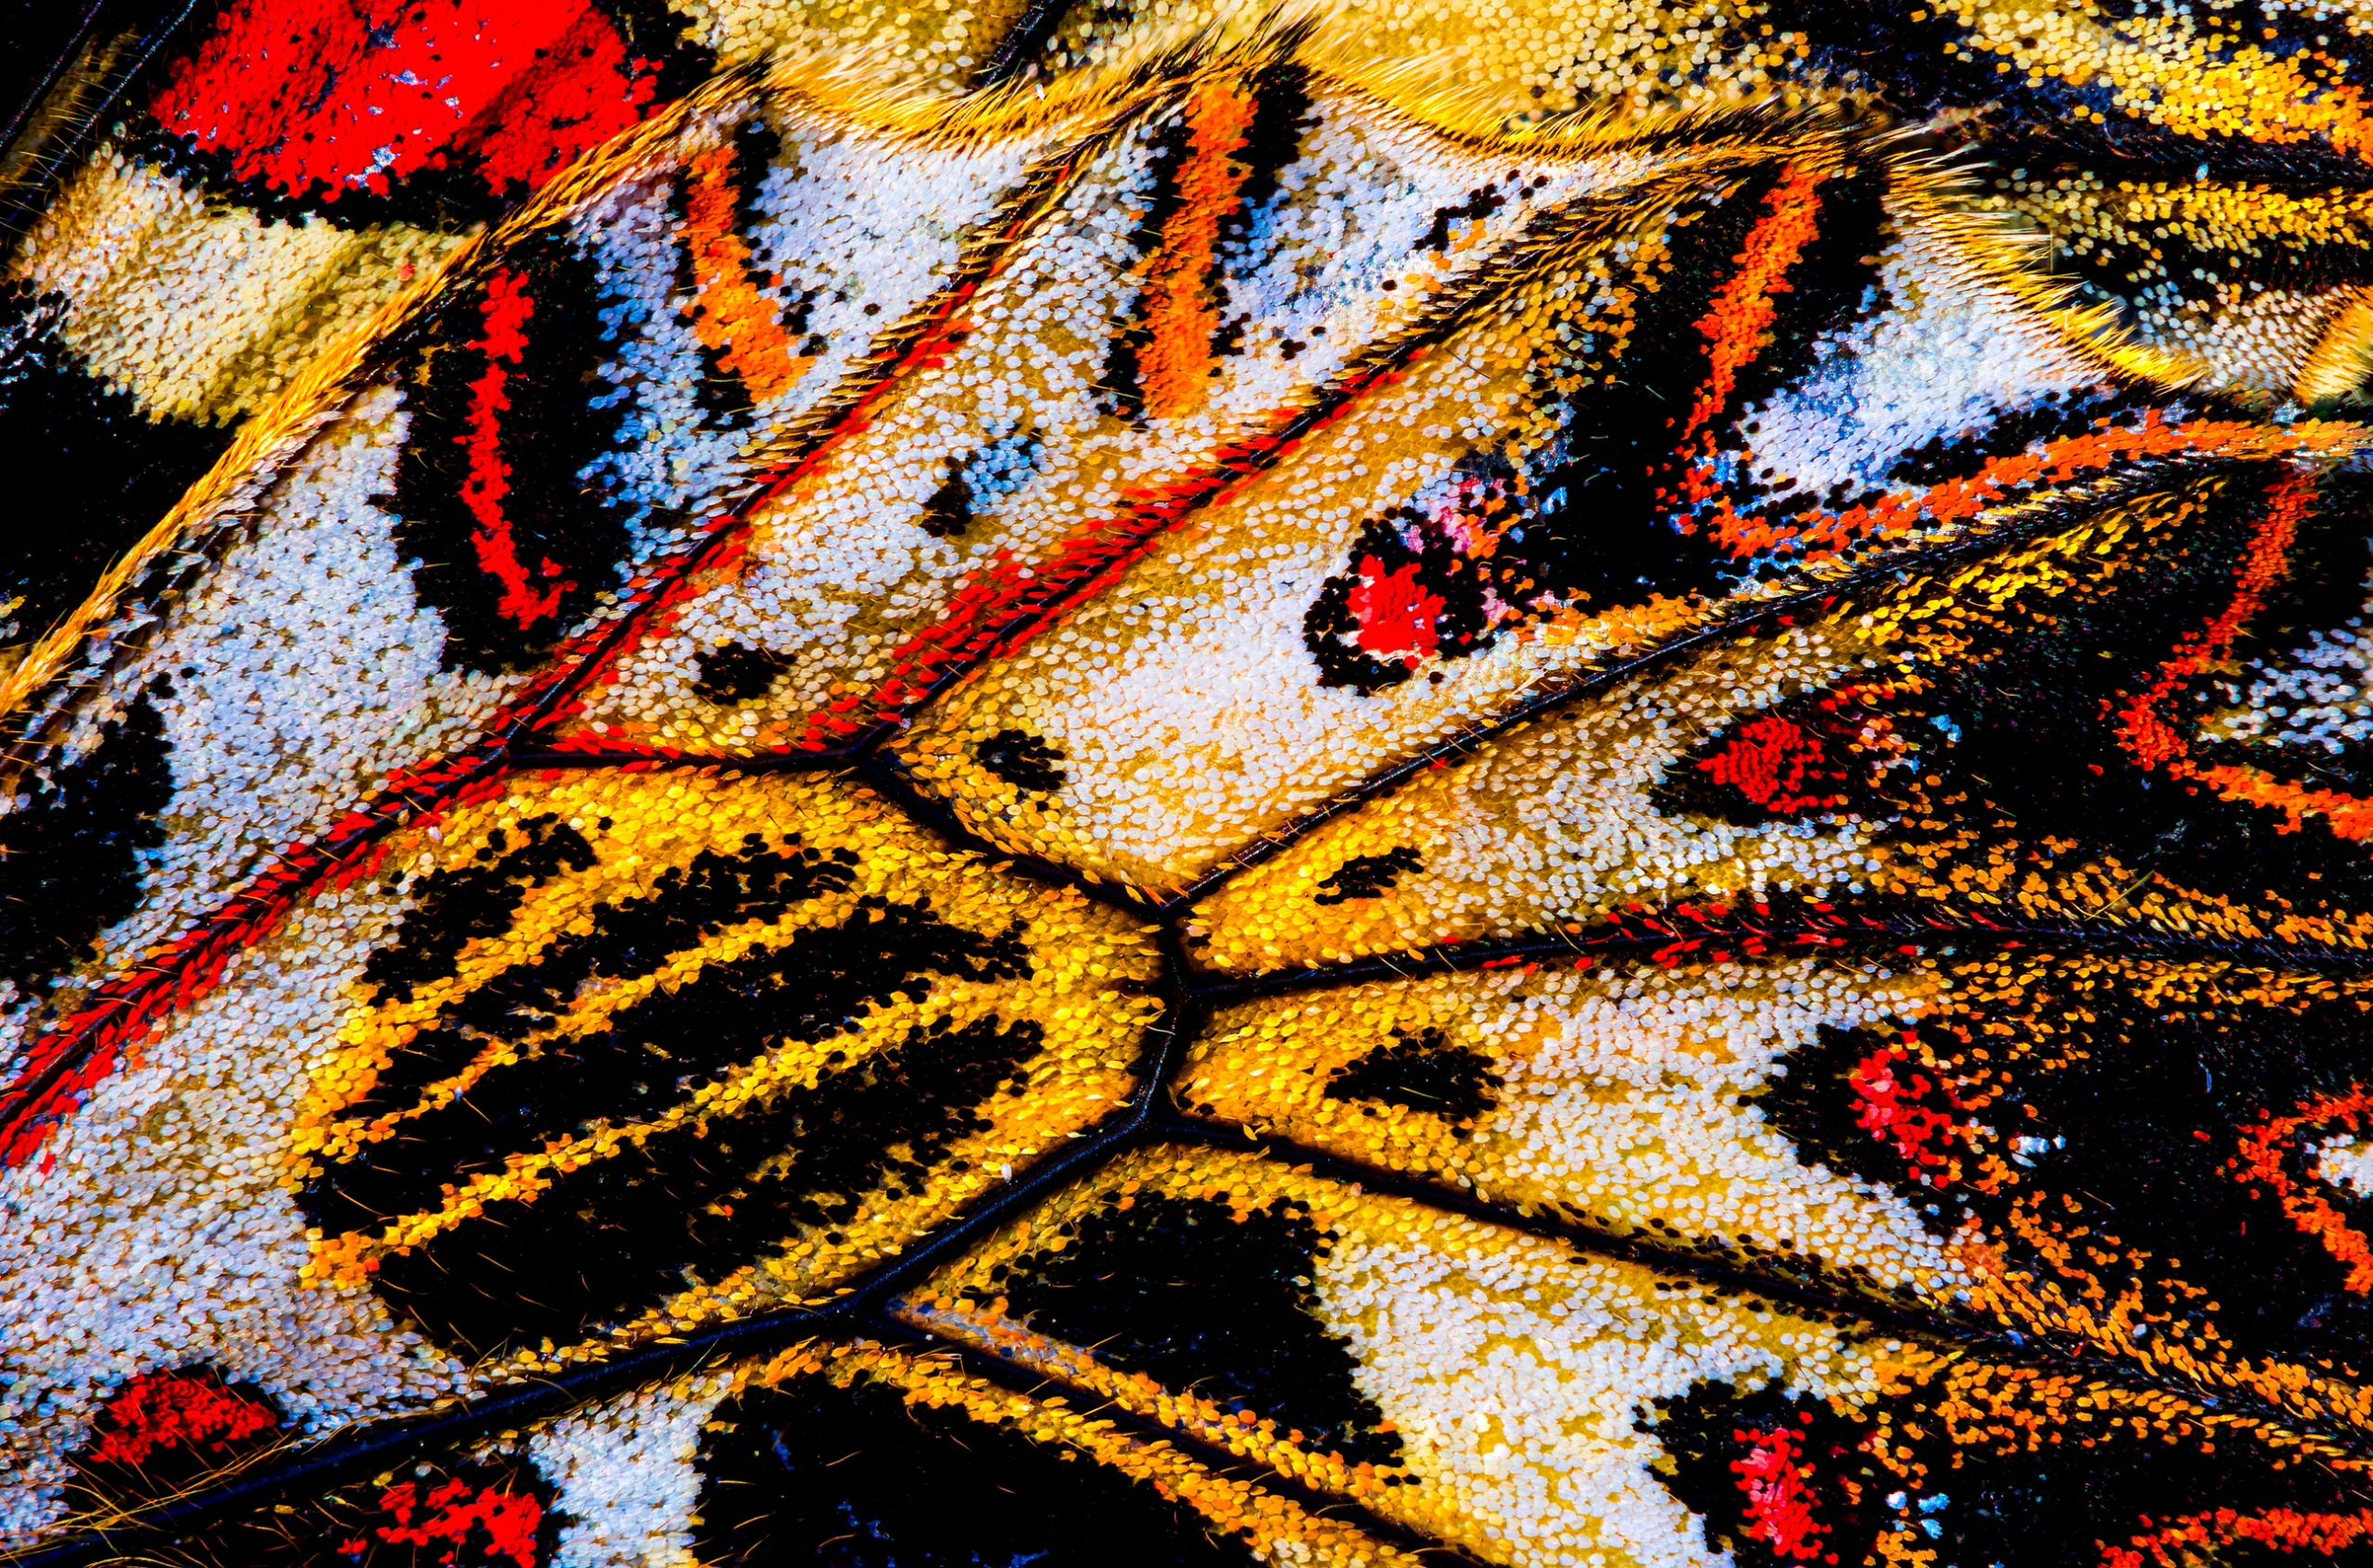 An extreme close-up view of scales on the underside of the hindwing of a southern festoon butterfly, Zerynthia polyxena, found resting with close wings on a plant in a forest habitat near Palovec